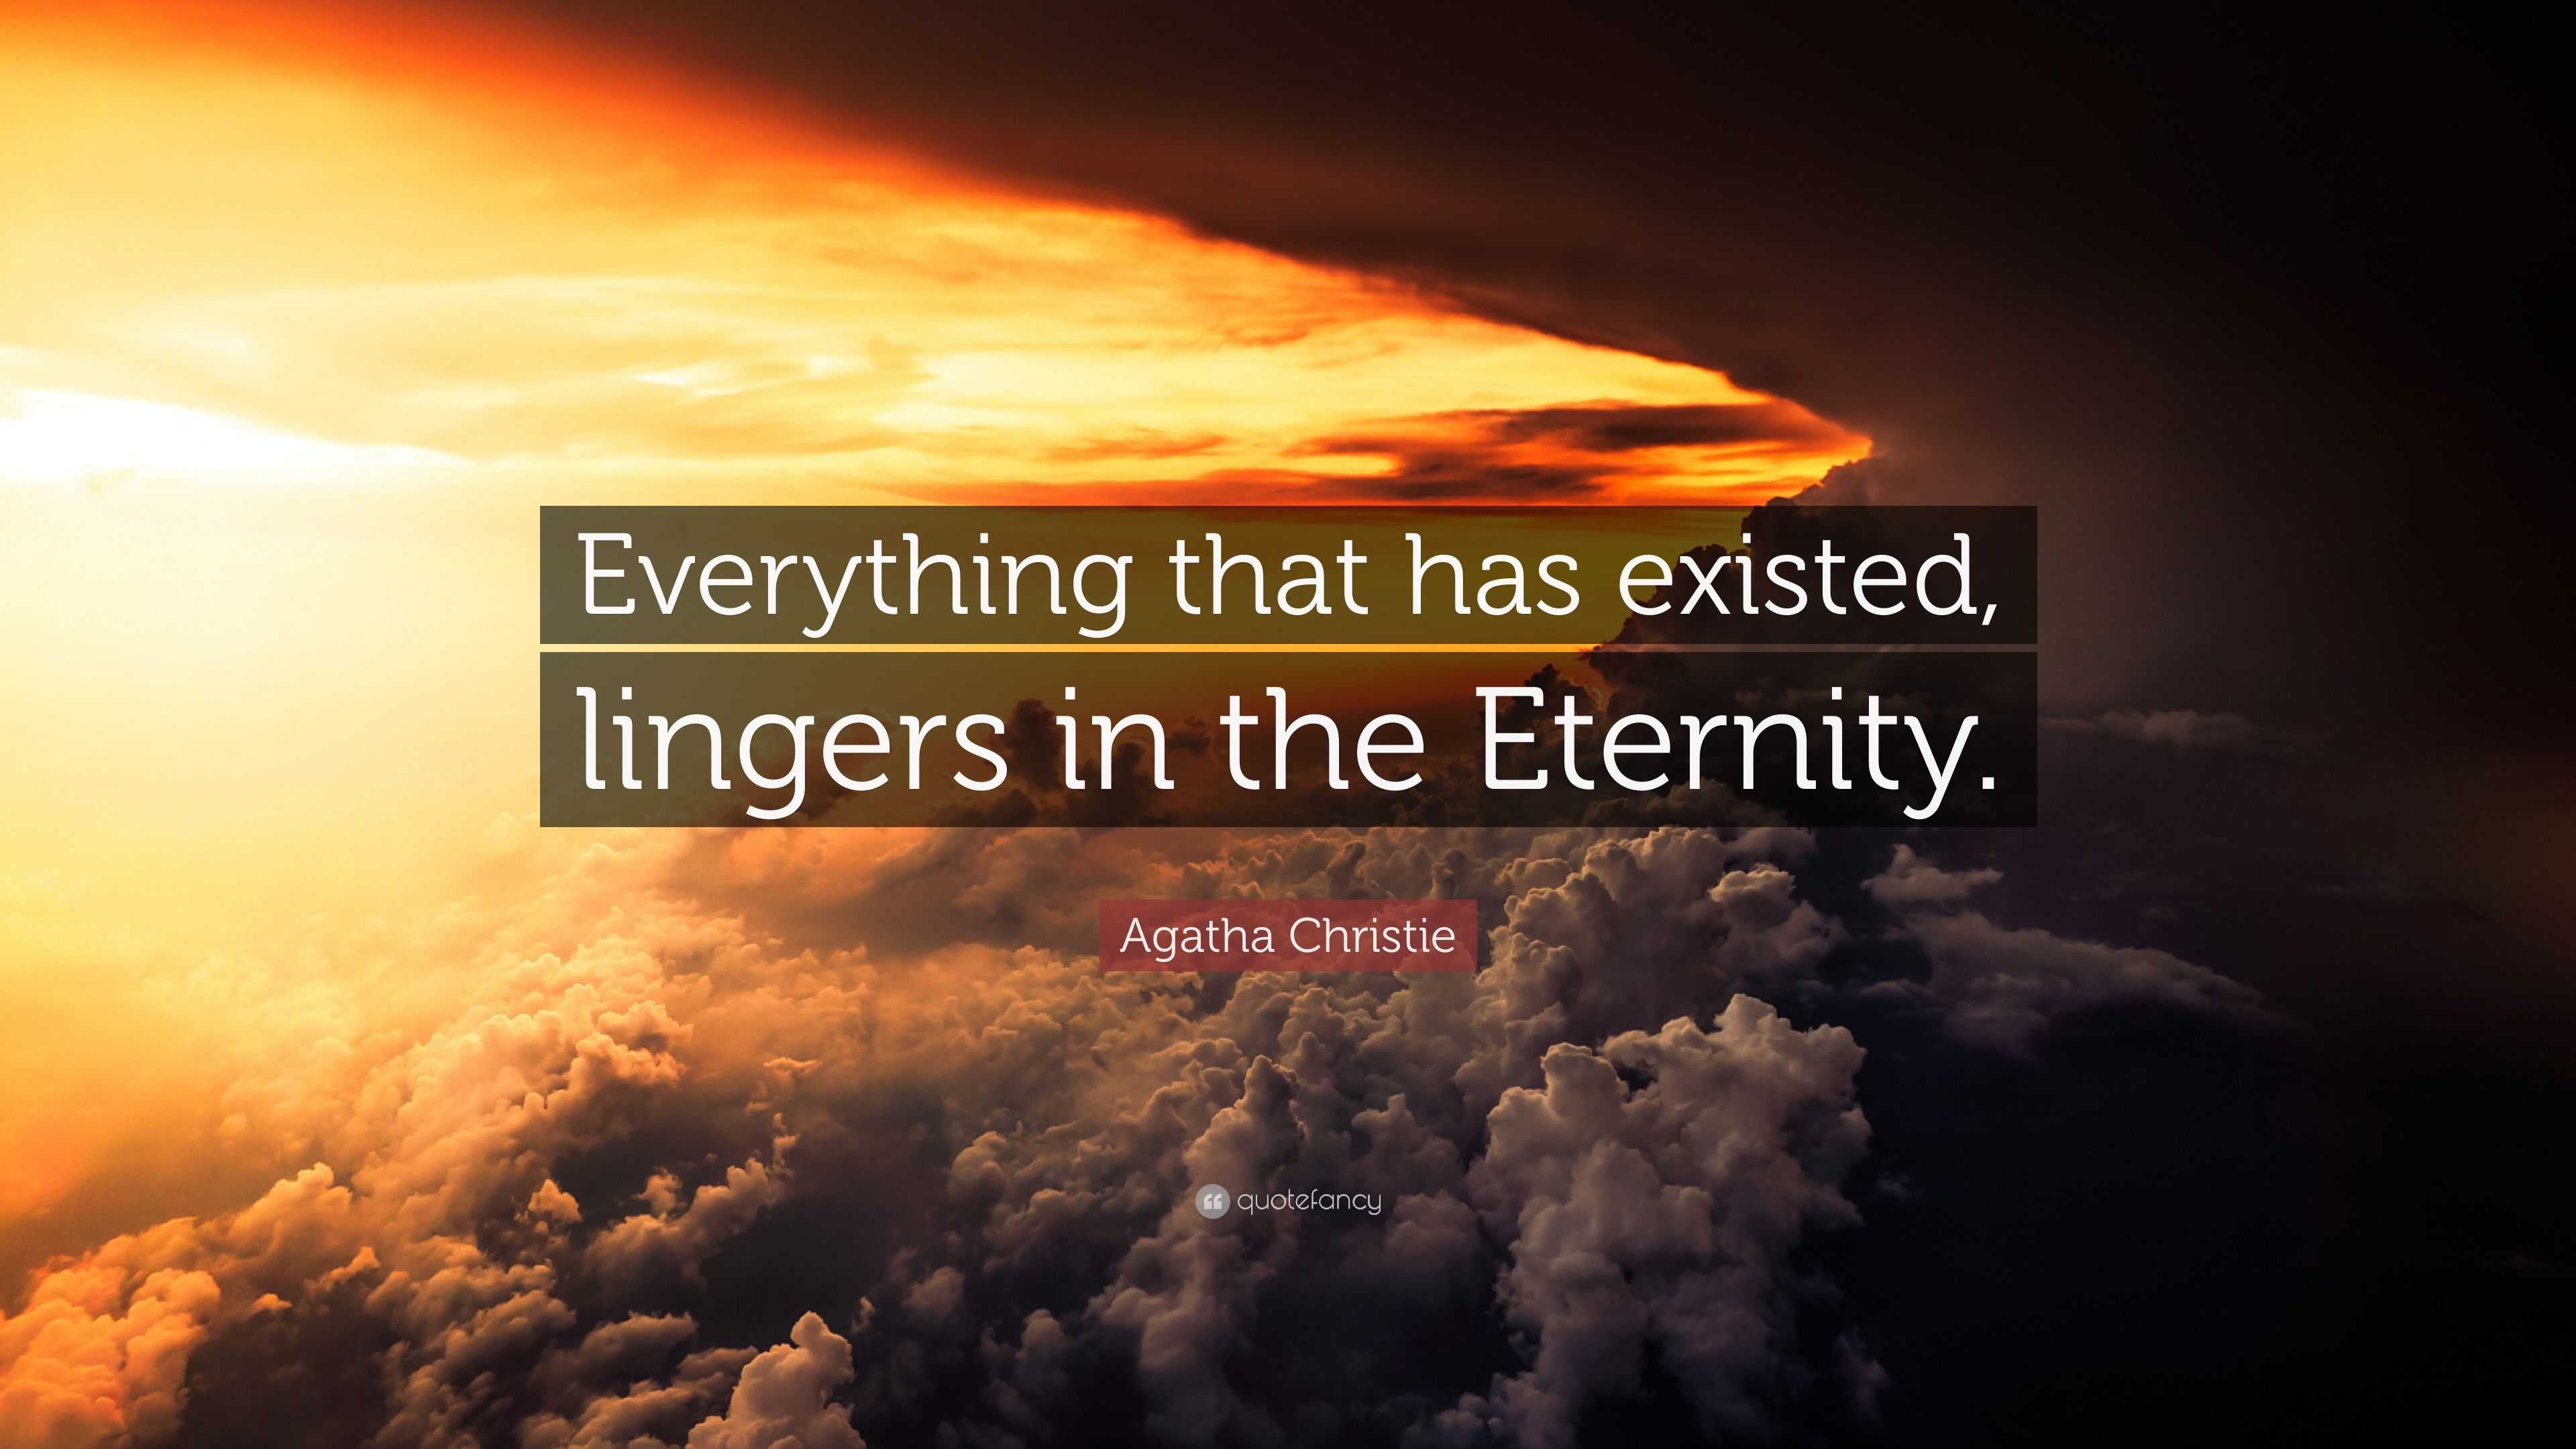 Agatha Christie Quote: “Everything that has existed, lingers in the  Eternity.”